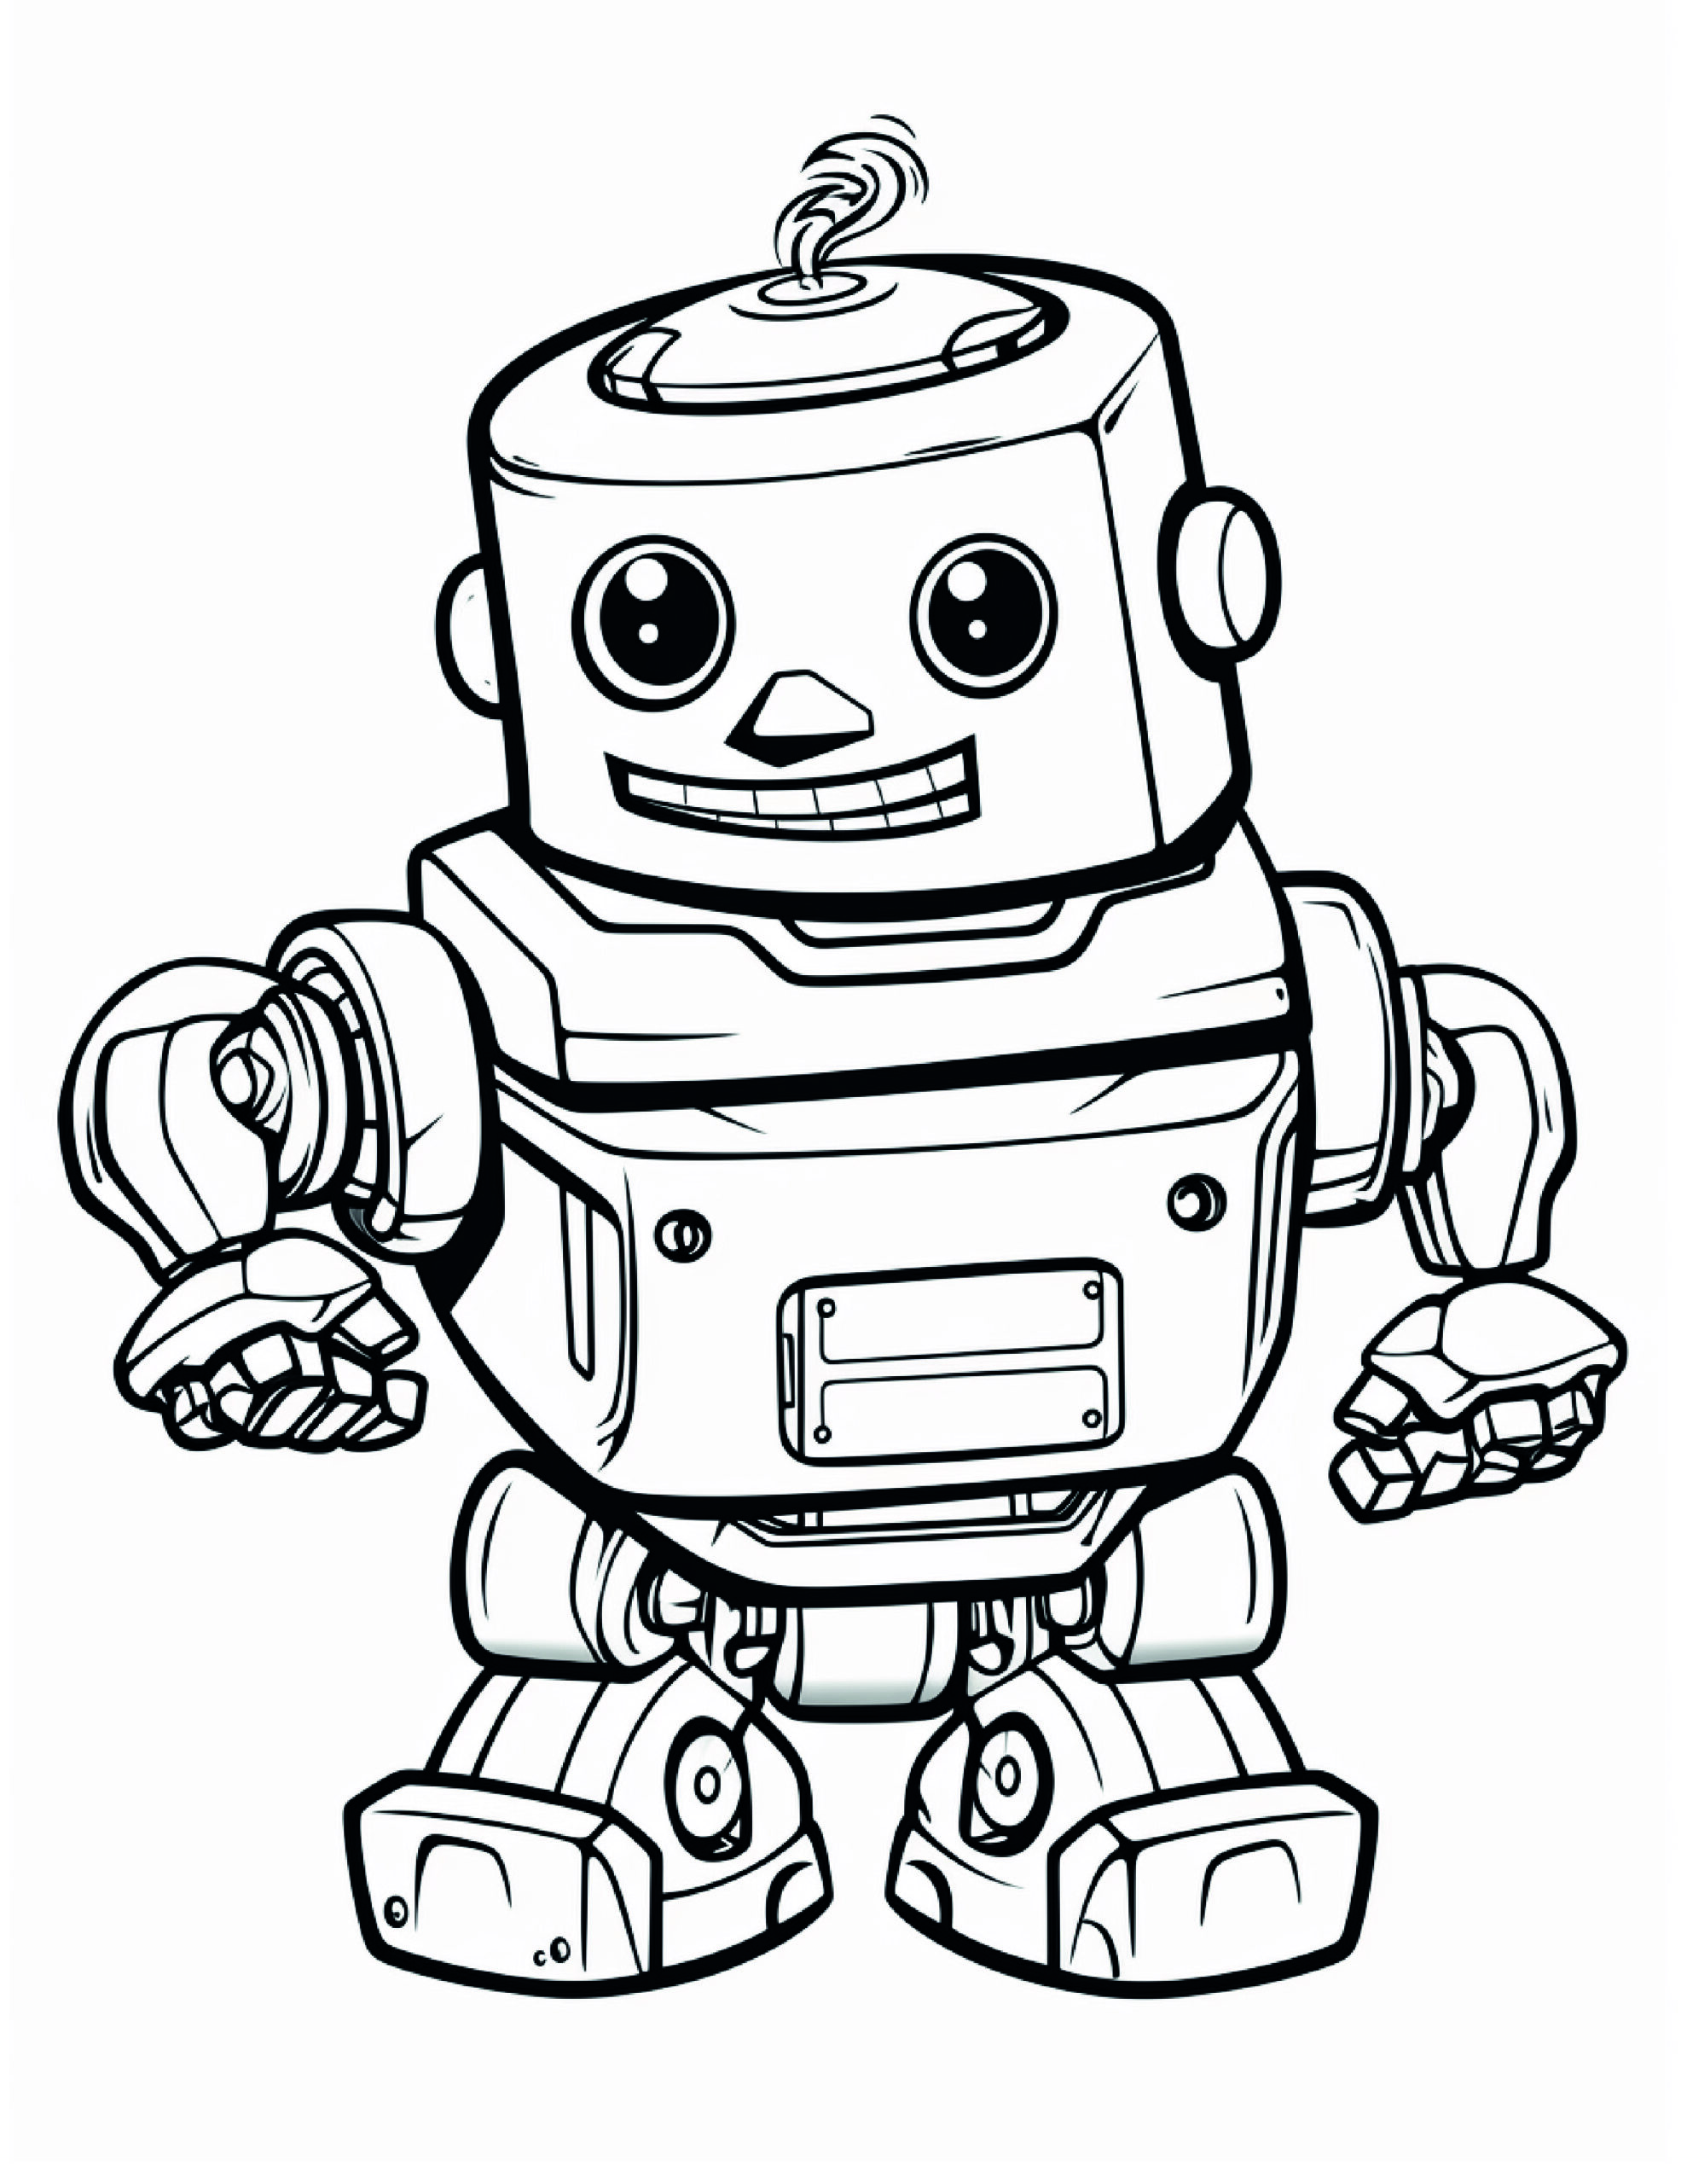 Robot Coloring Page 4 - A line drawing of a smart robot. 